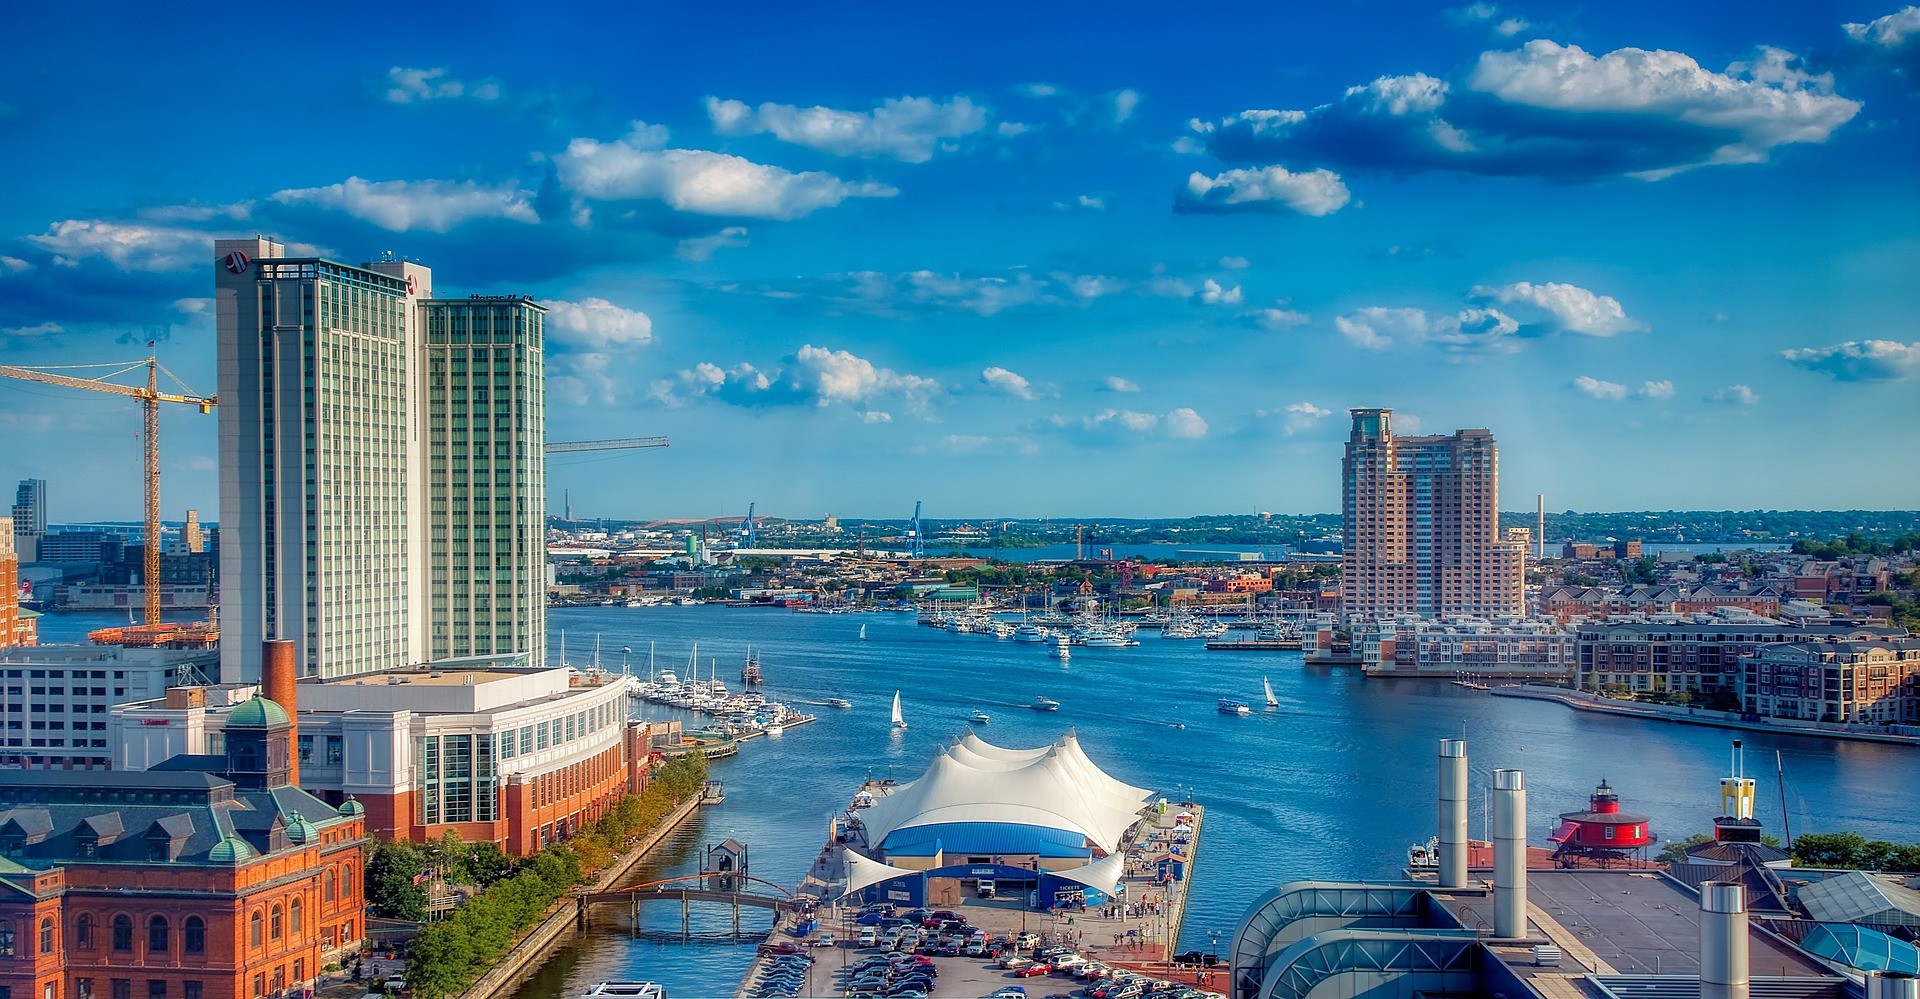 Best Shore Excursions for Baltimore, Maryland